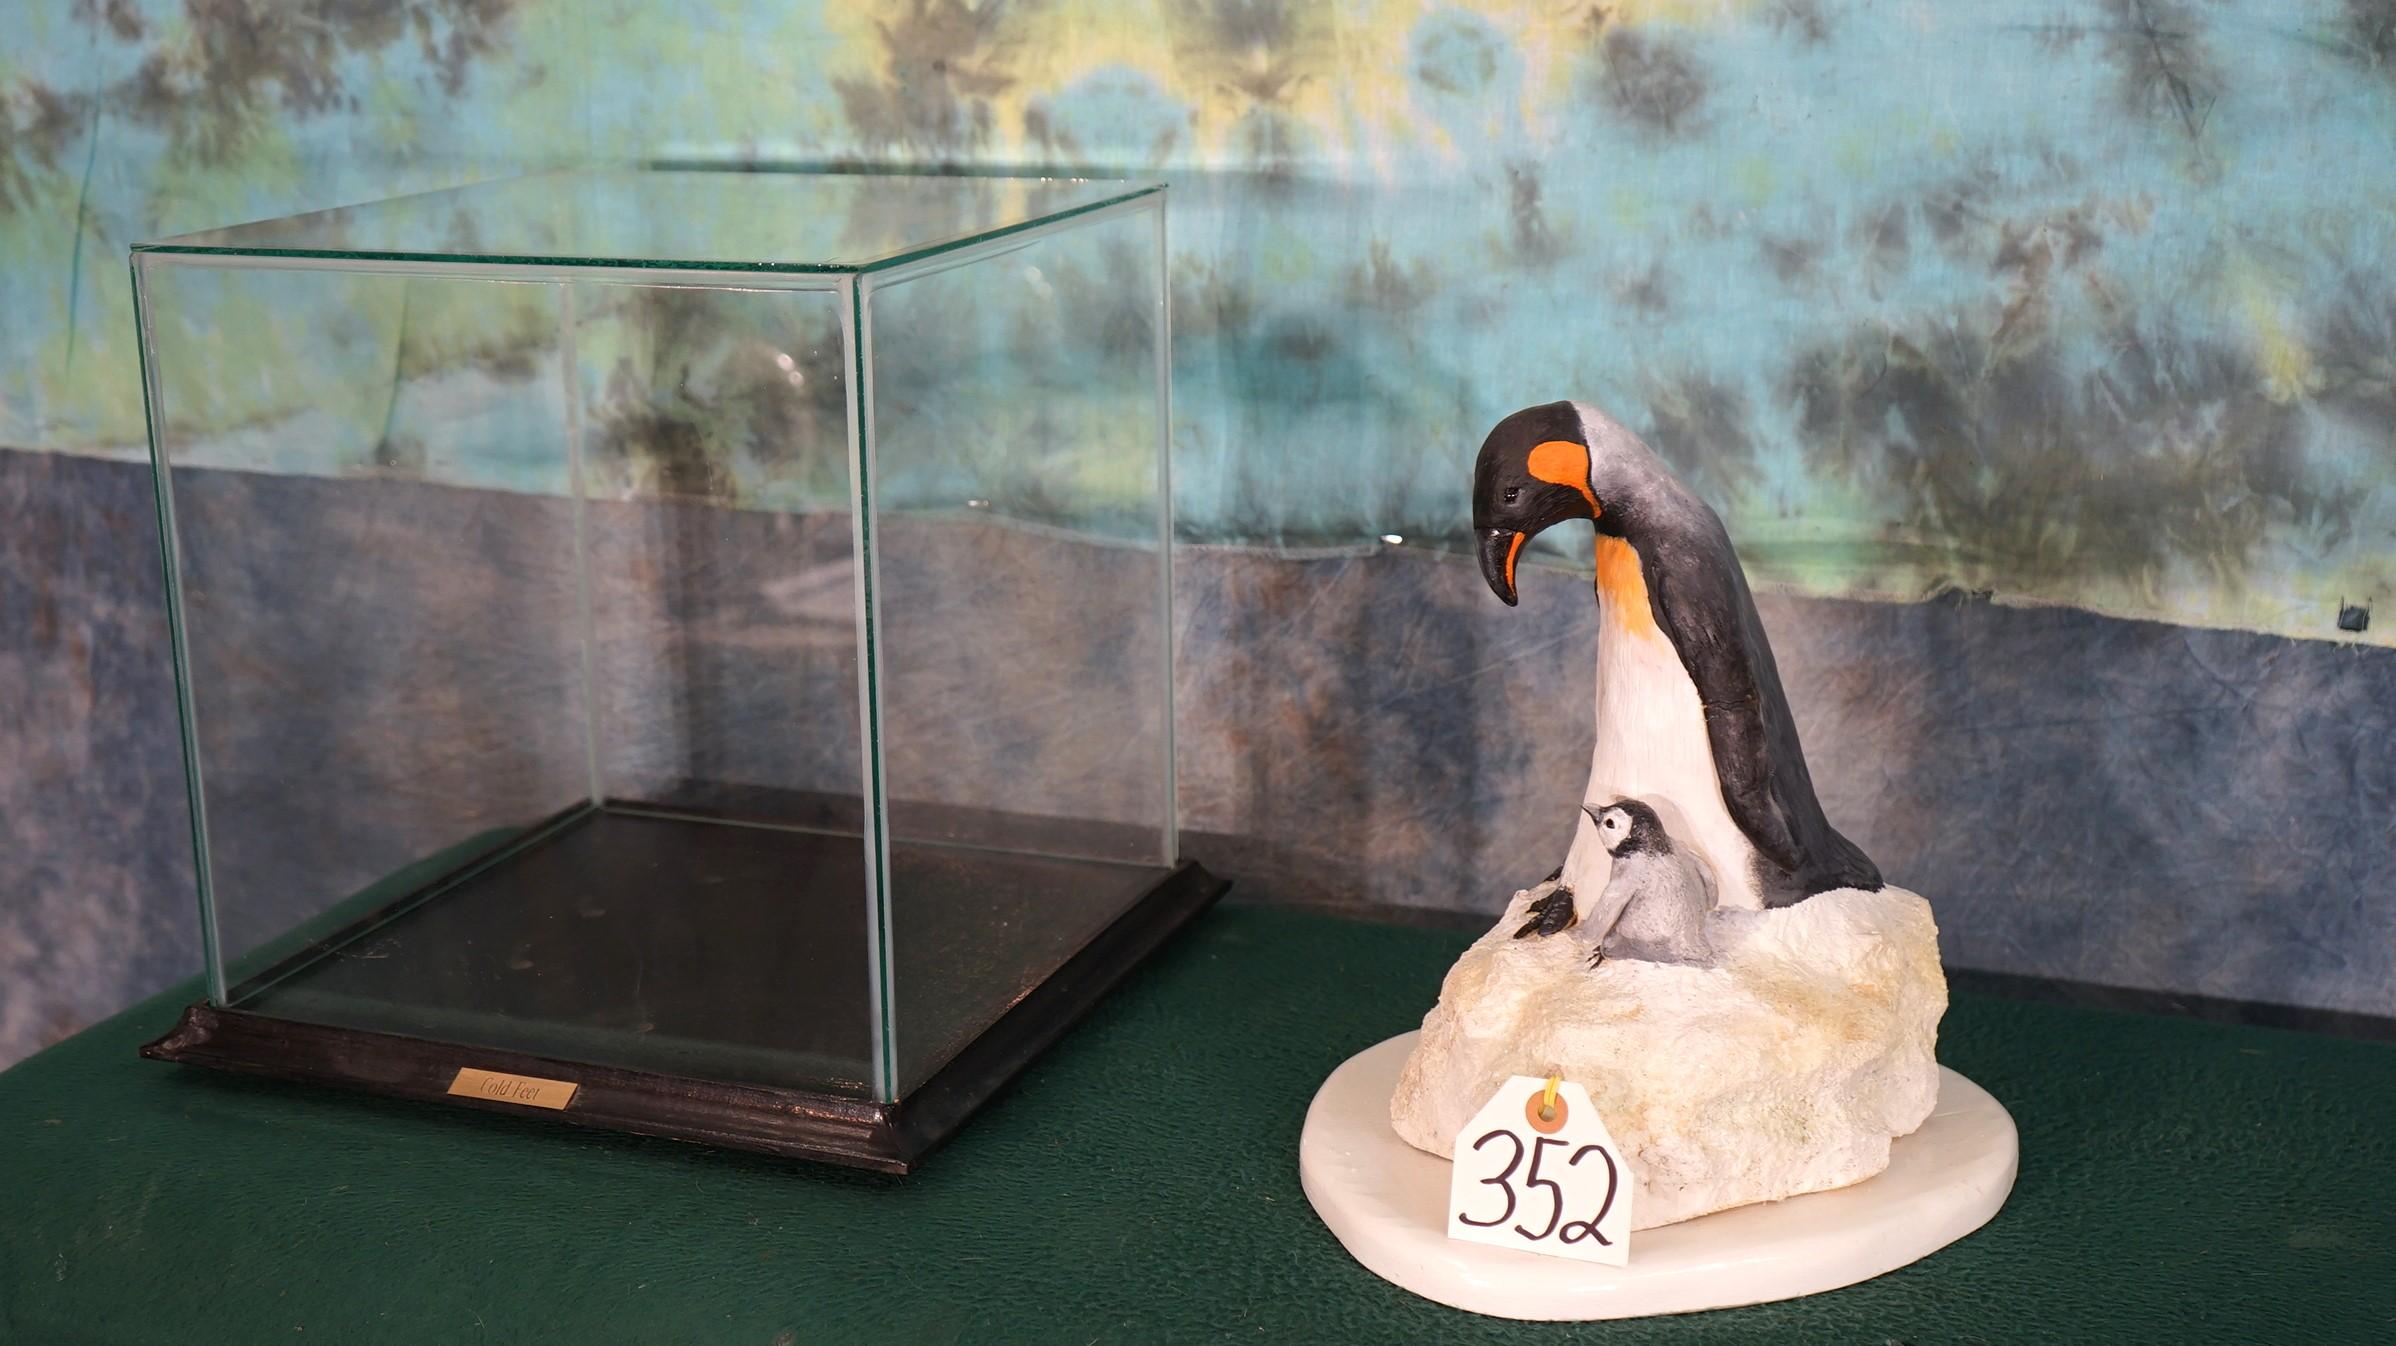 Sculpture of Mother Penguin with Baby called "Cold Feet"